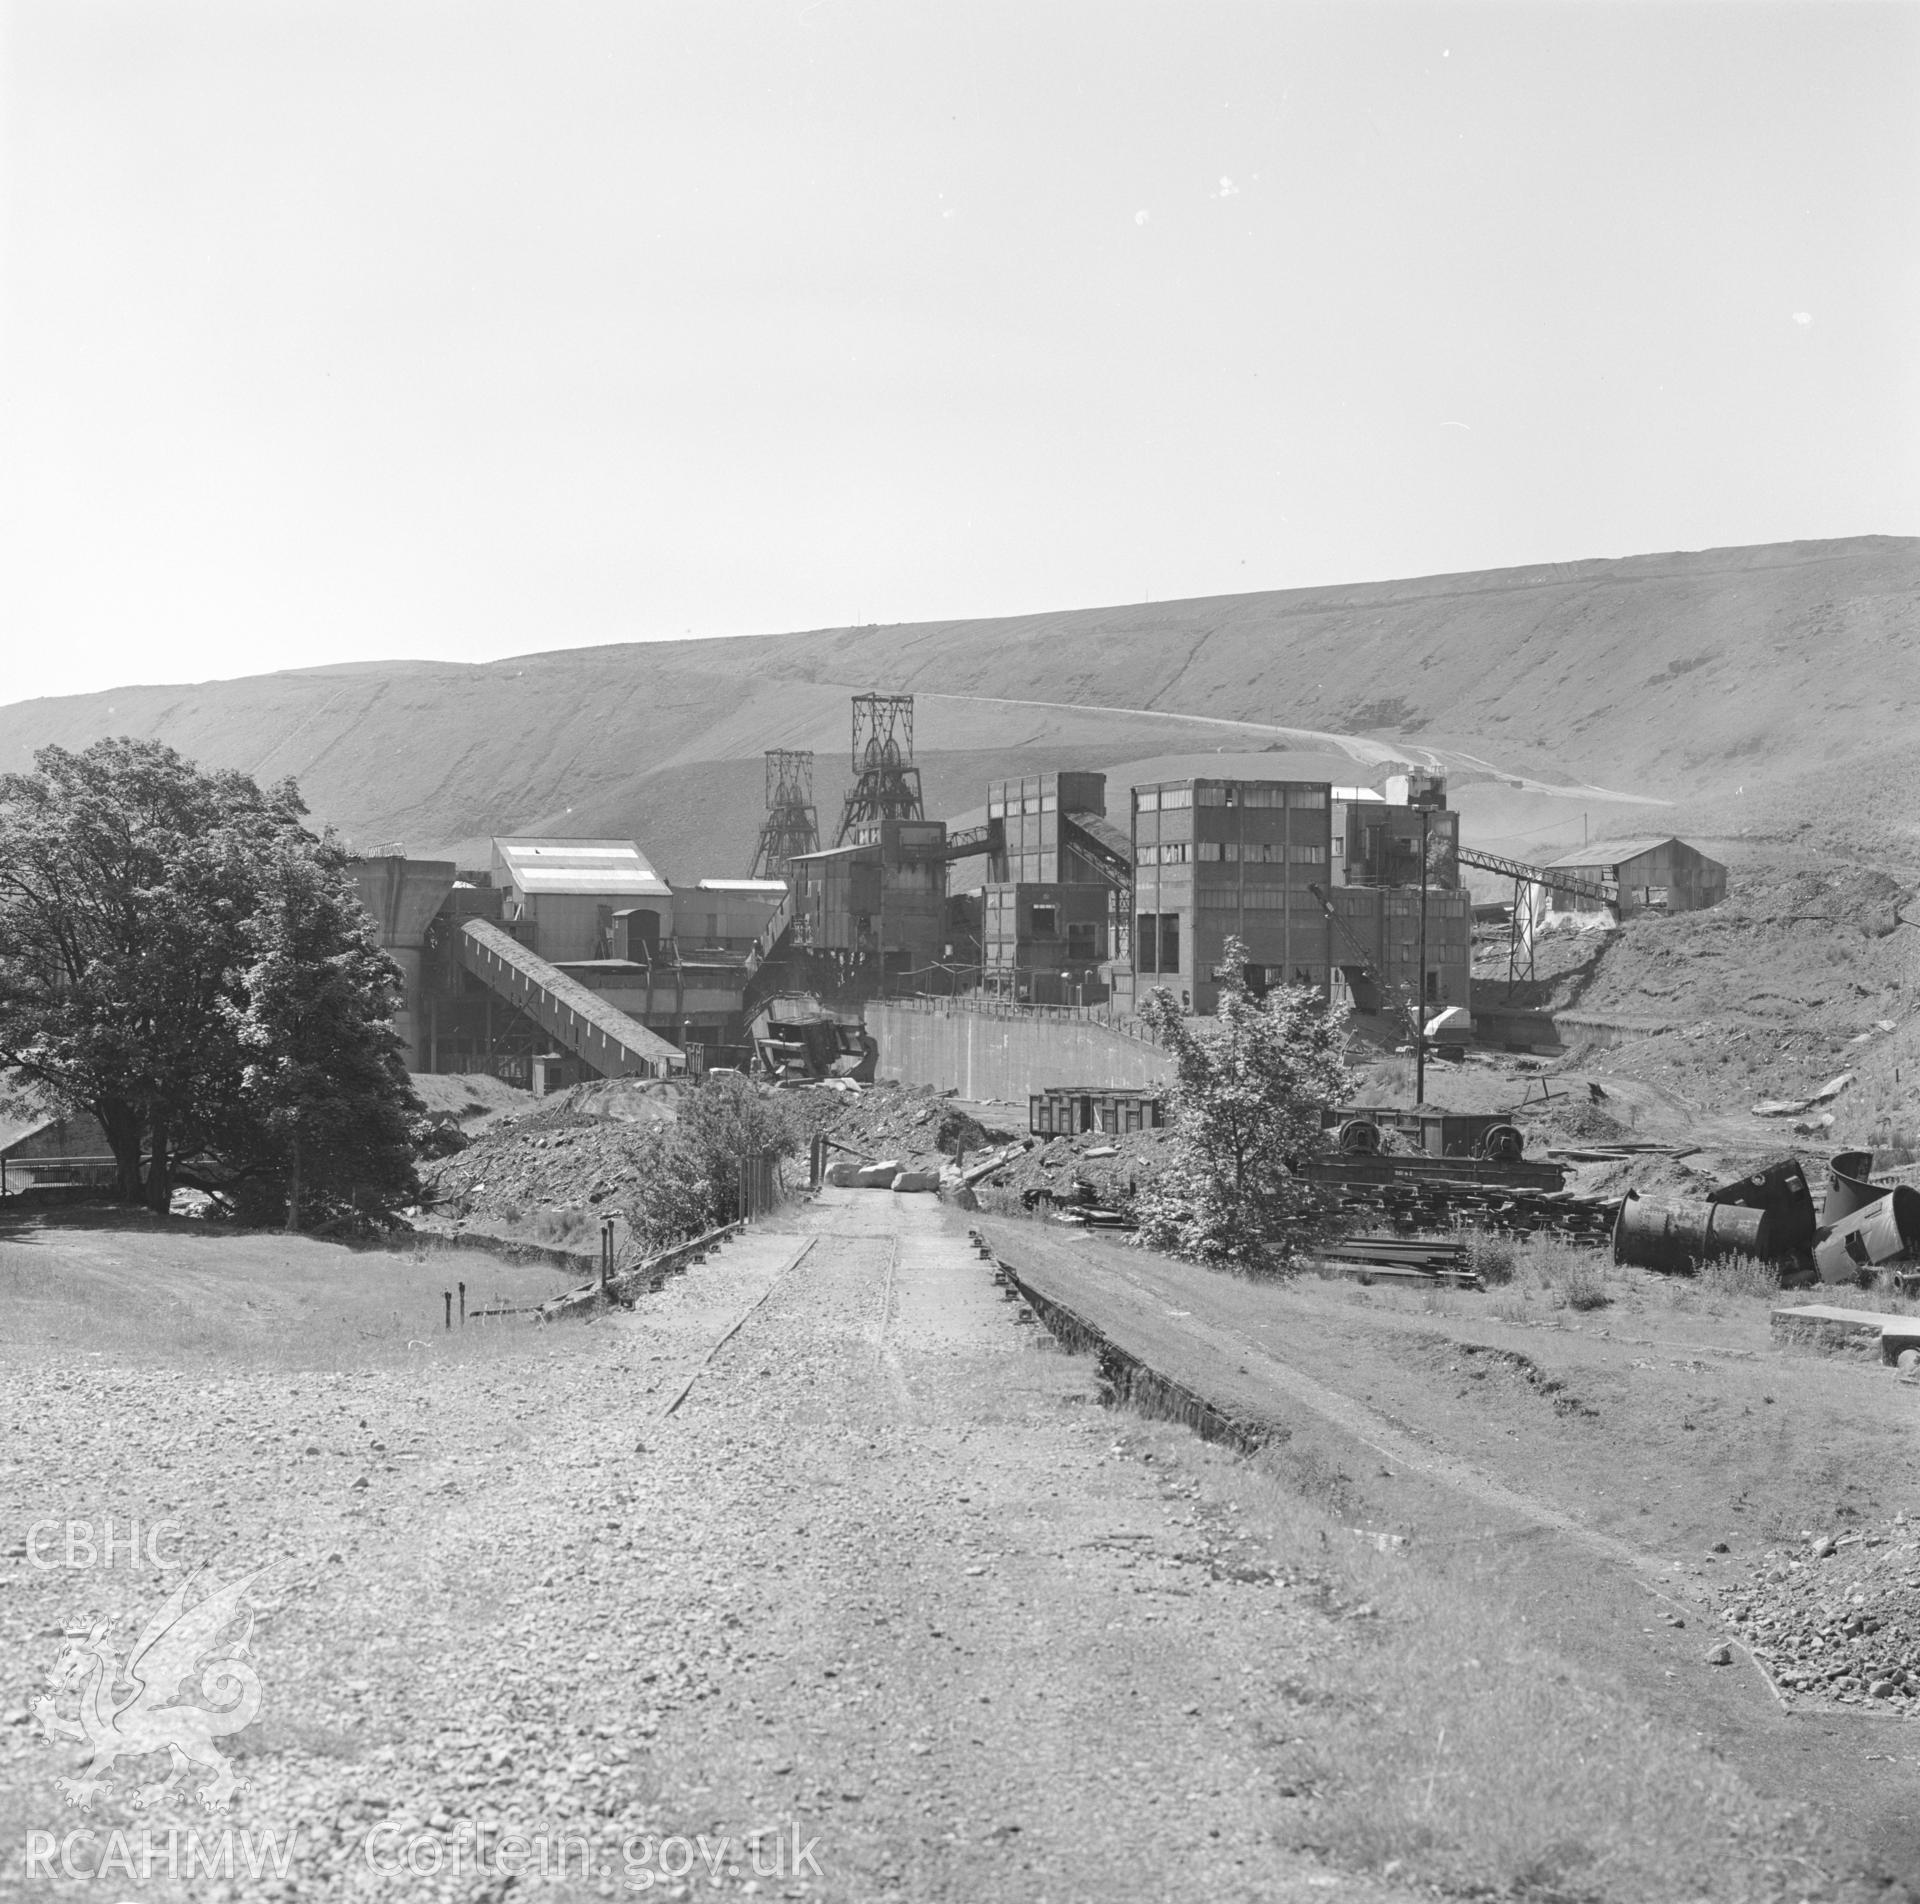 Digital copy of an acetate negative showing general view of Maerdy Colliery from north, from the John Cornwell Collection.